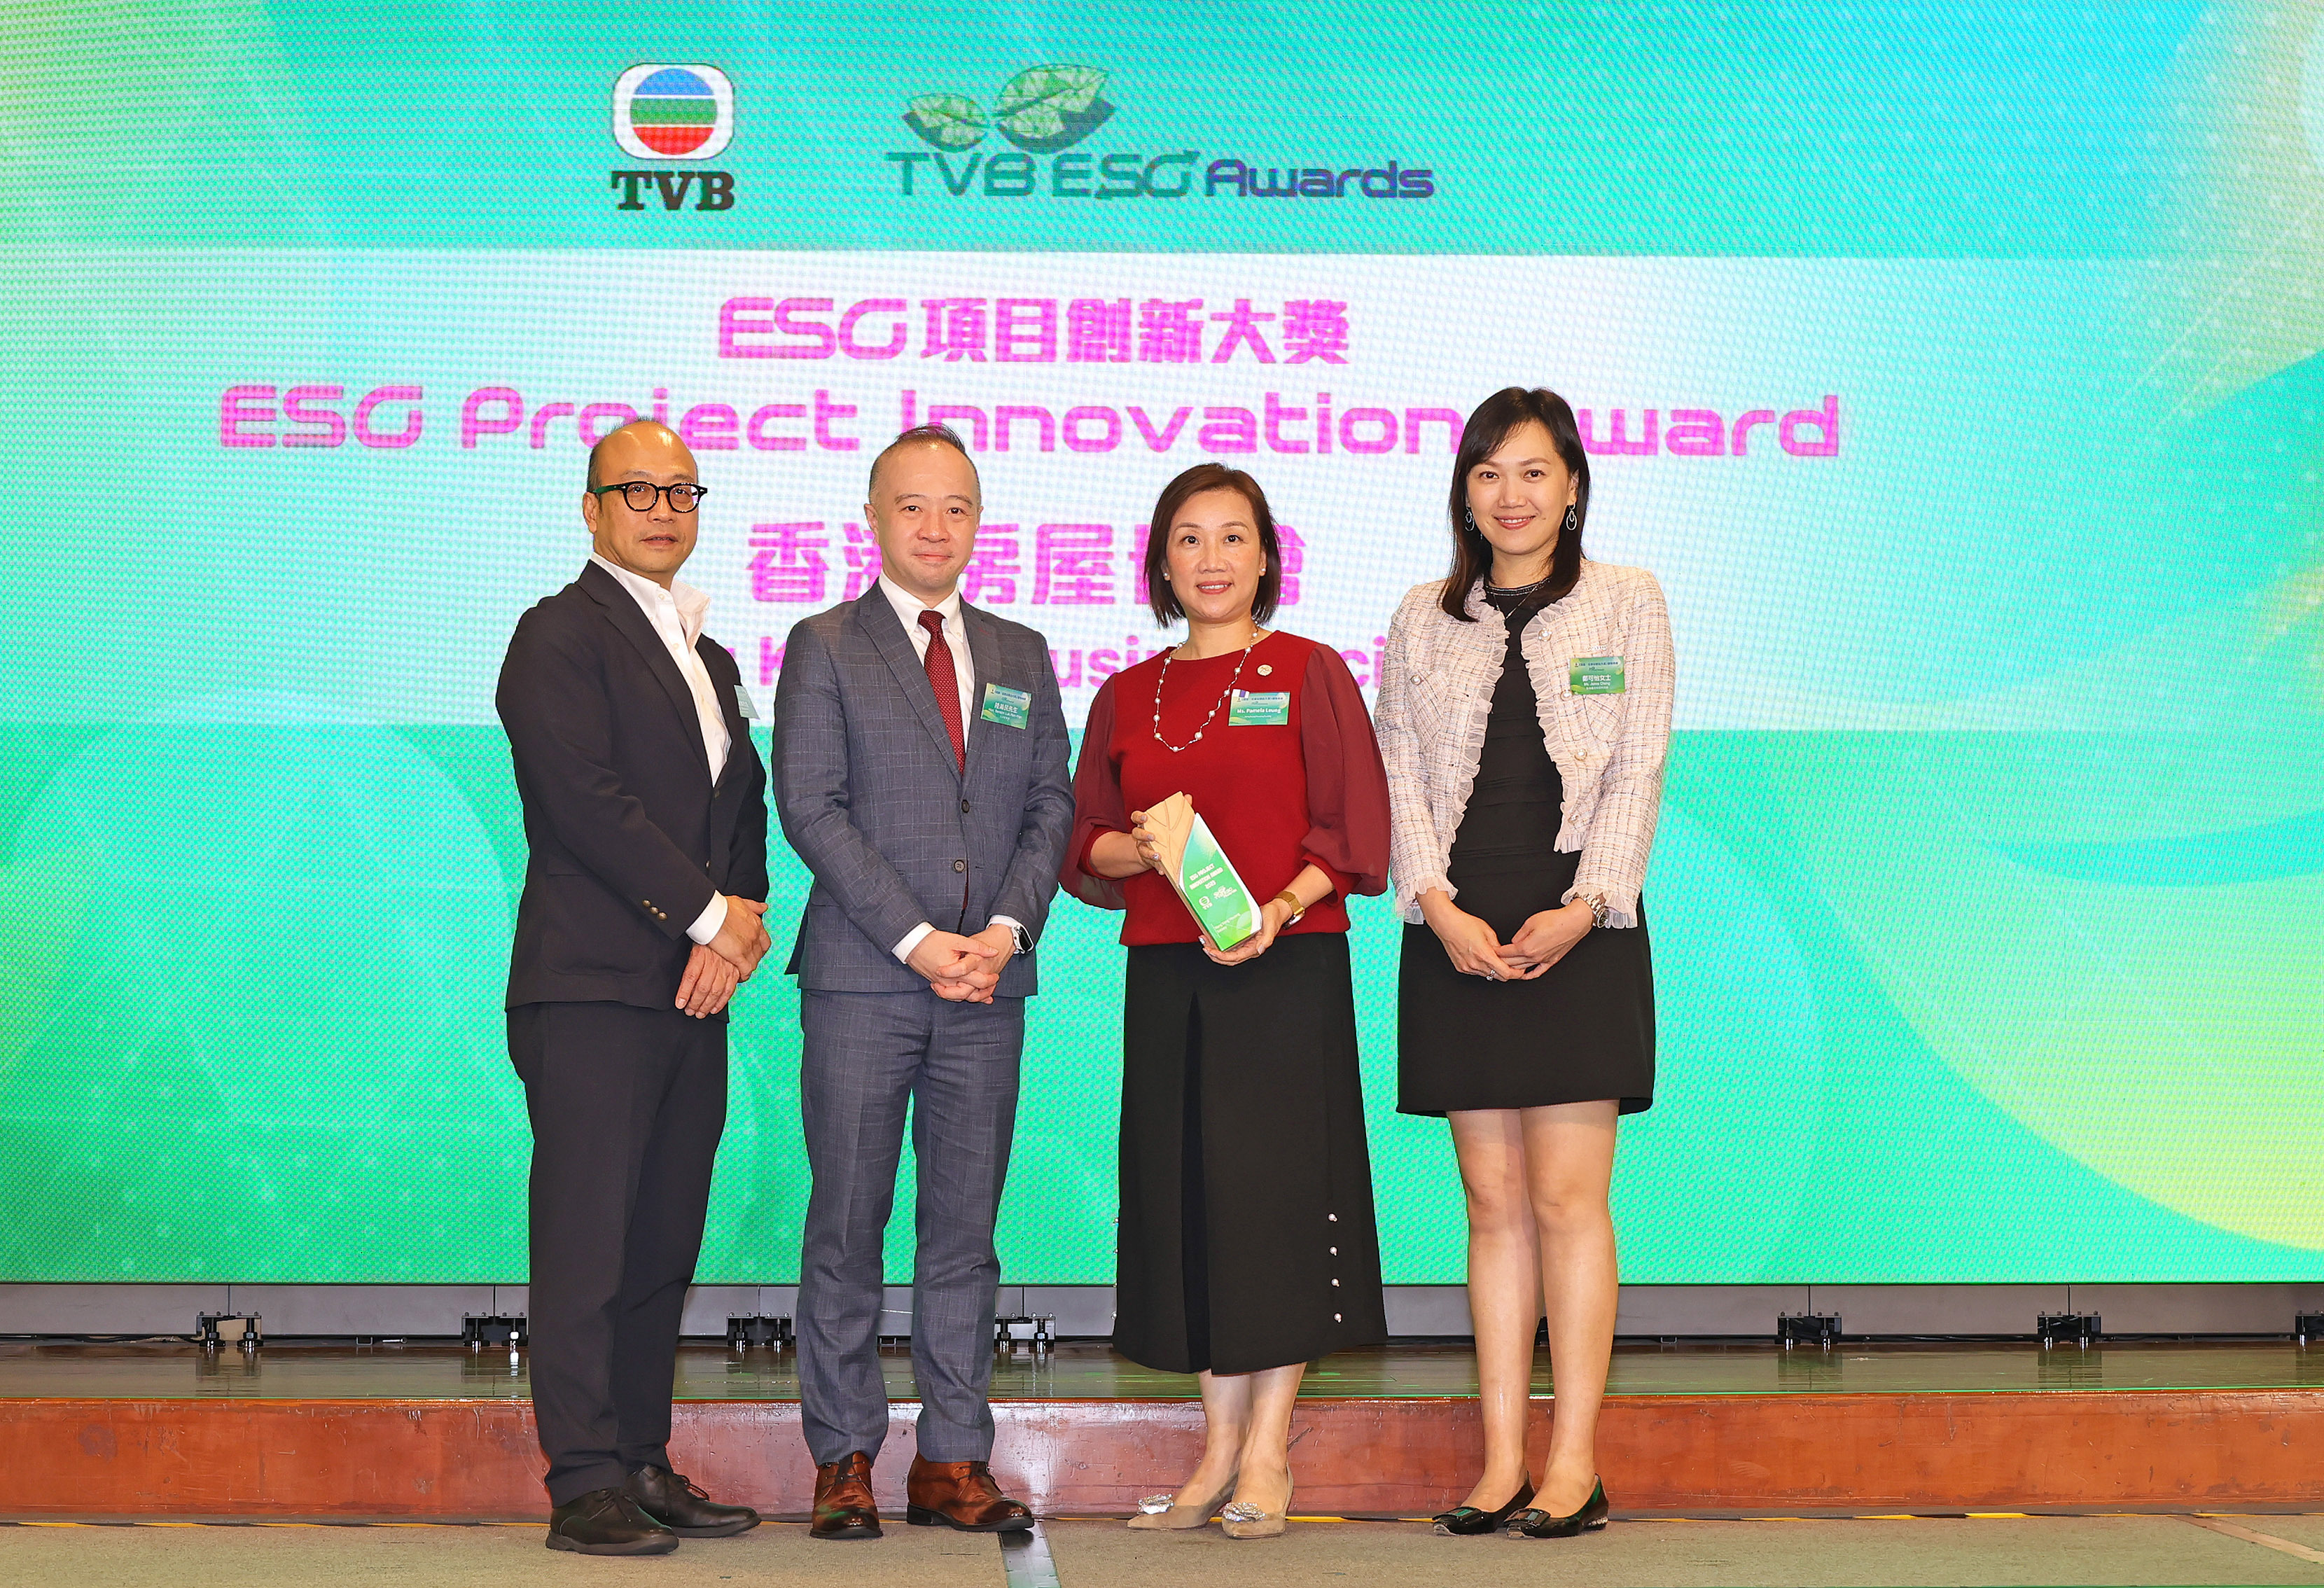 HKHS was presented with the “ESG Project Innovation Award” for the first time at the TVB ESG Awards 2023.